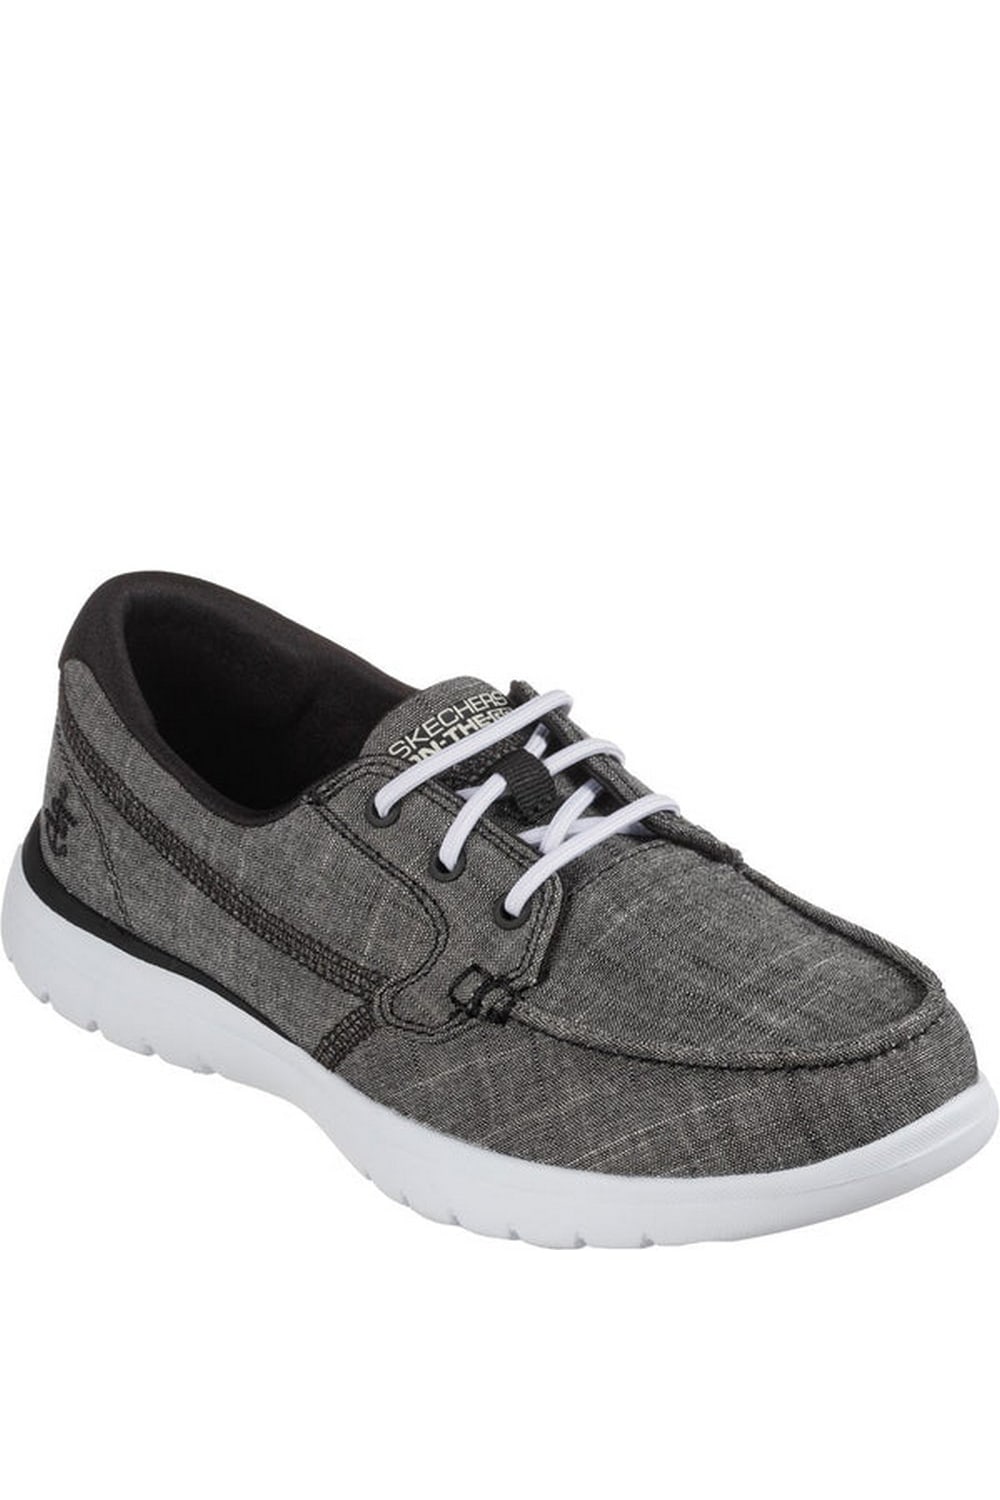 Womens/Ladies On The Go Boat Shoes - Black/White